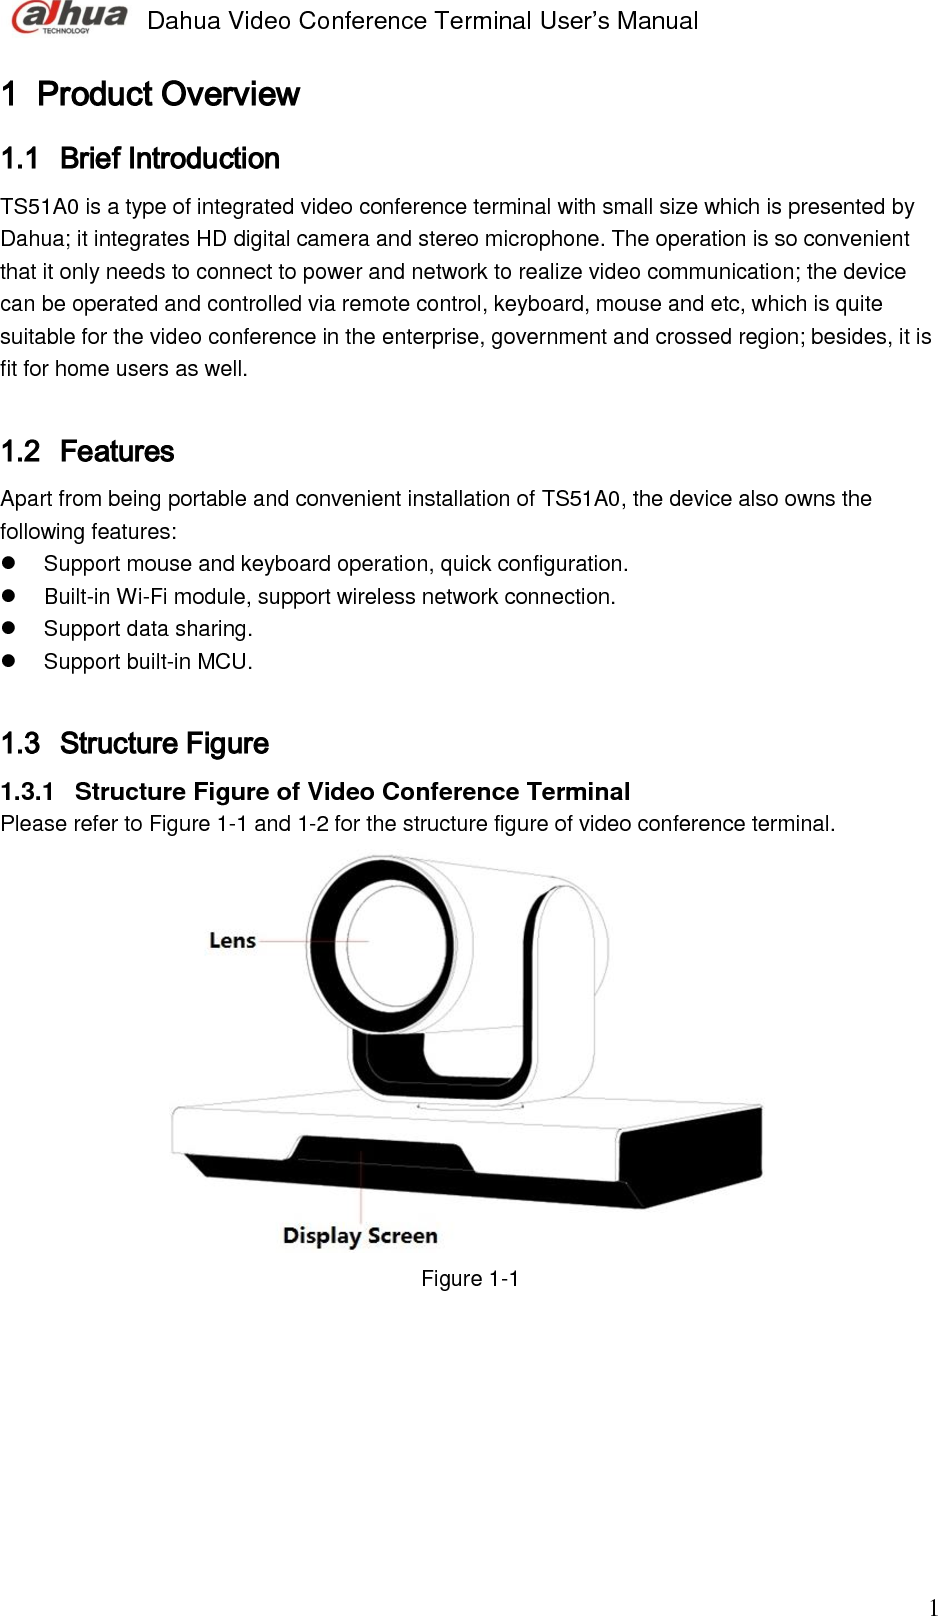  Dahua Video Conference Terminal User’s Manual                                                                              1 1 Product Overview 1.1 Brief Introduction  TS51A0 is a type of integrated video conference terminal with small size which is presented by Dahua; it integrates HD digital camera and stereo microphone. The operation is so convenient that it only needs to connect to power and network to realize video communication; the device can be operated and controlled via remote control, keyboard, mouse and etc, which is quite suitable for the video conference in the enterprise, government and crossed region; besides, it is fit for home users as well.   1.2 Features  Apart from being portable and convenient installation of TS51A0, the device also owns the following features:    Support mouse and keyboard operation, quick configuration.   Built-in Wi-Fi module, support wireless network connection.   Support data sharing.   Support built-in MCU.   1.3 Structure Figure 1.3.1  Structure Figure of Video Conference Terminal  Please refer to Figure 1-1 and 1-2 for the structure figure of video conference terminal.   Figure 1-1 